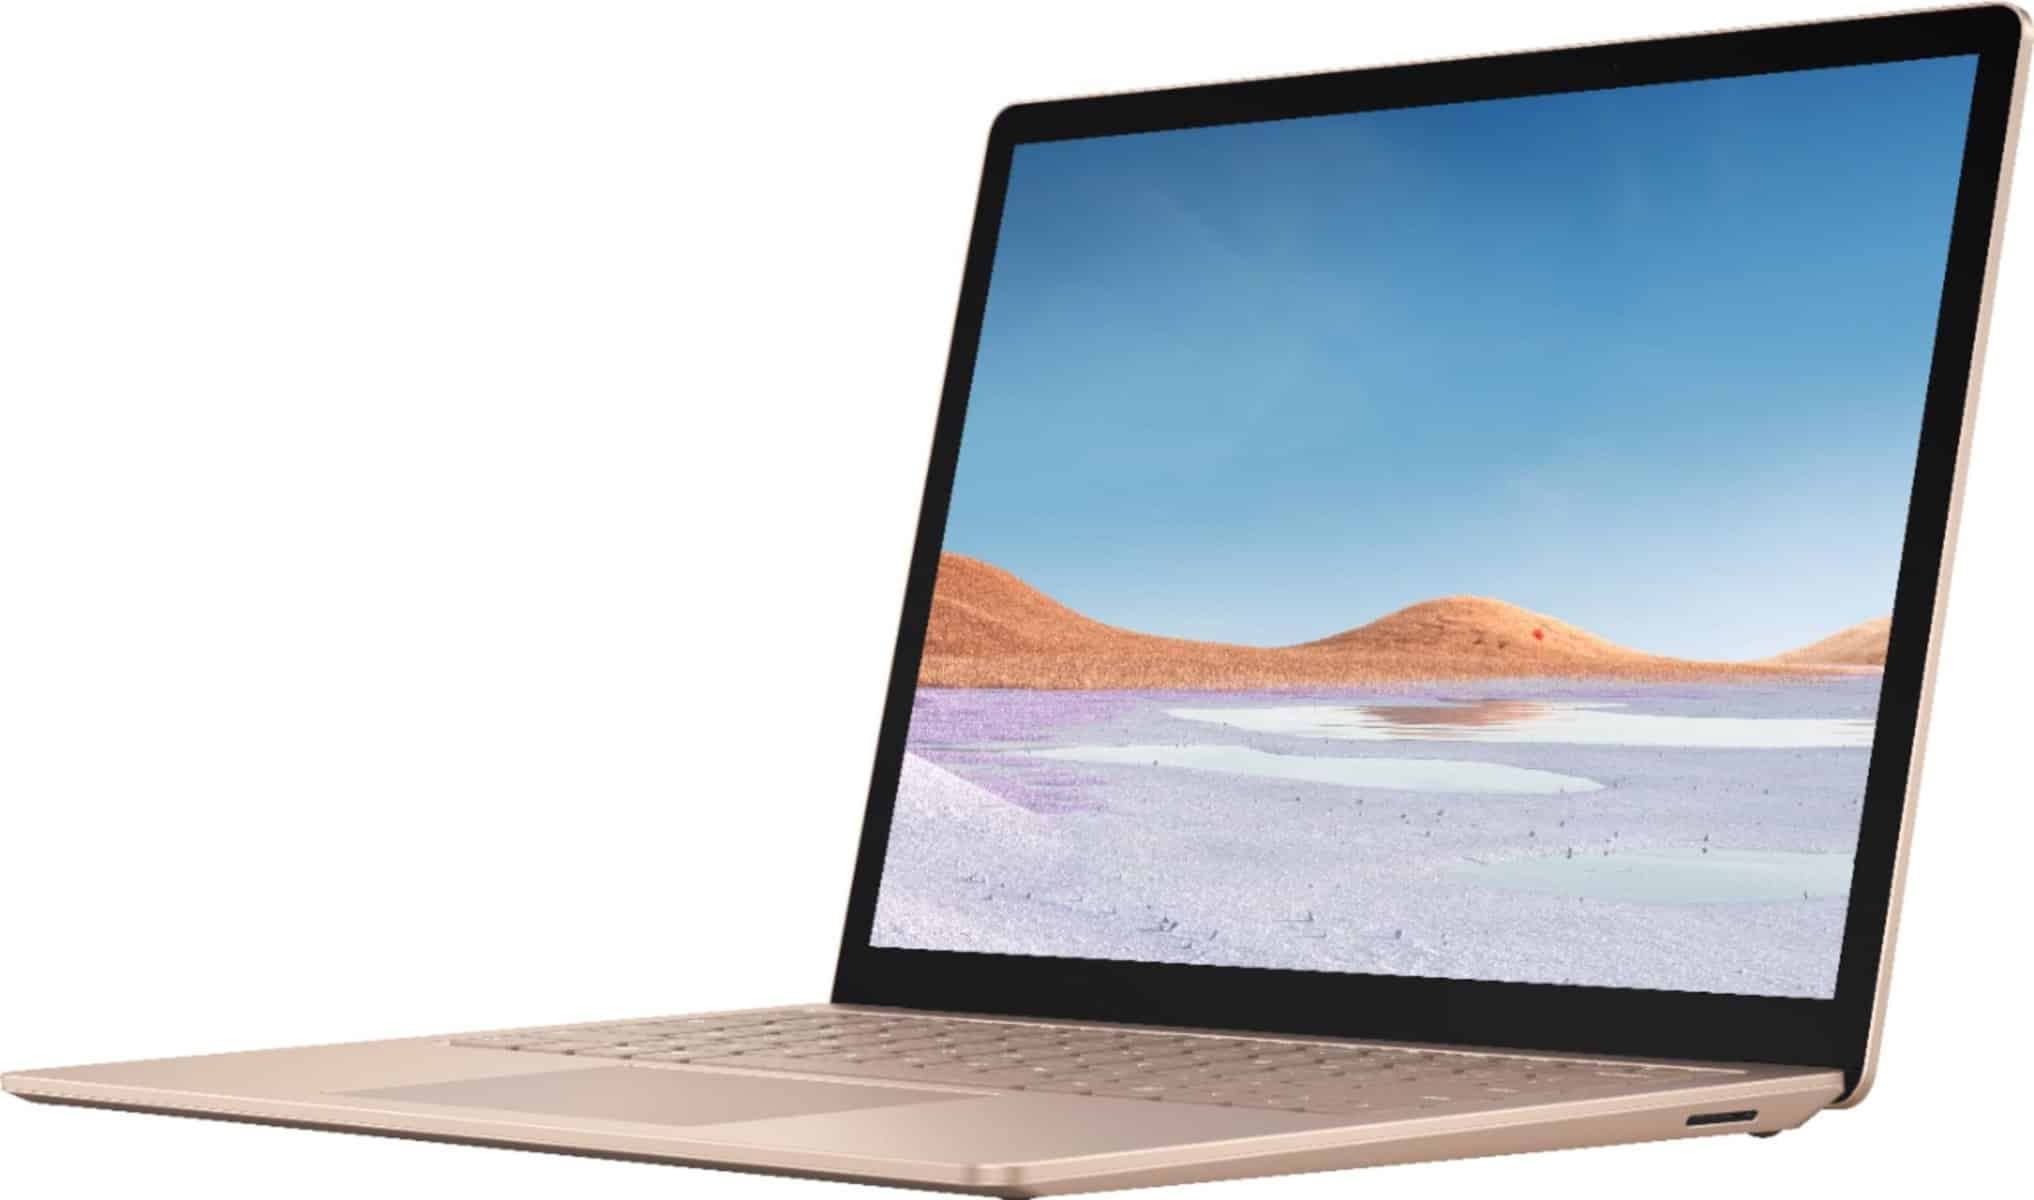 Microsoft Surface Laptop 3 Price and Specs | No 1 Tech Blog In Nigeria